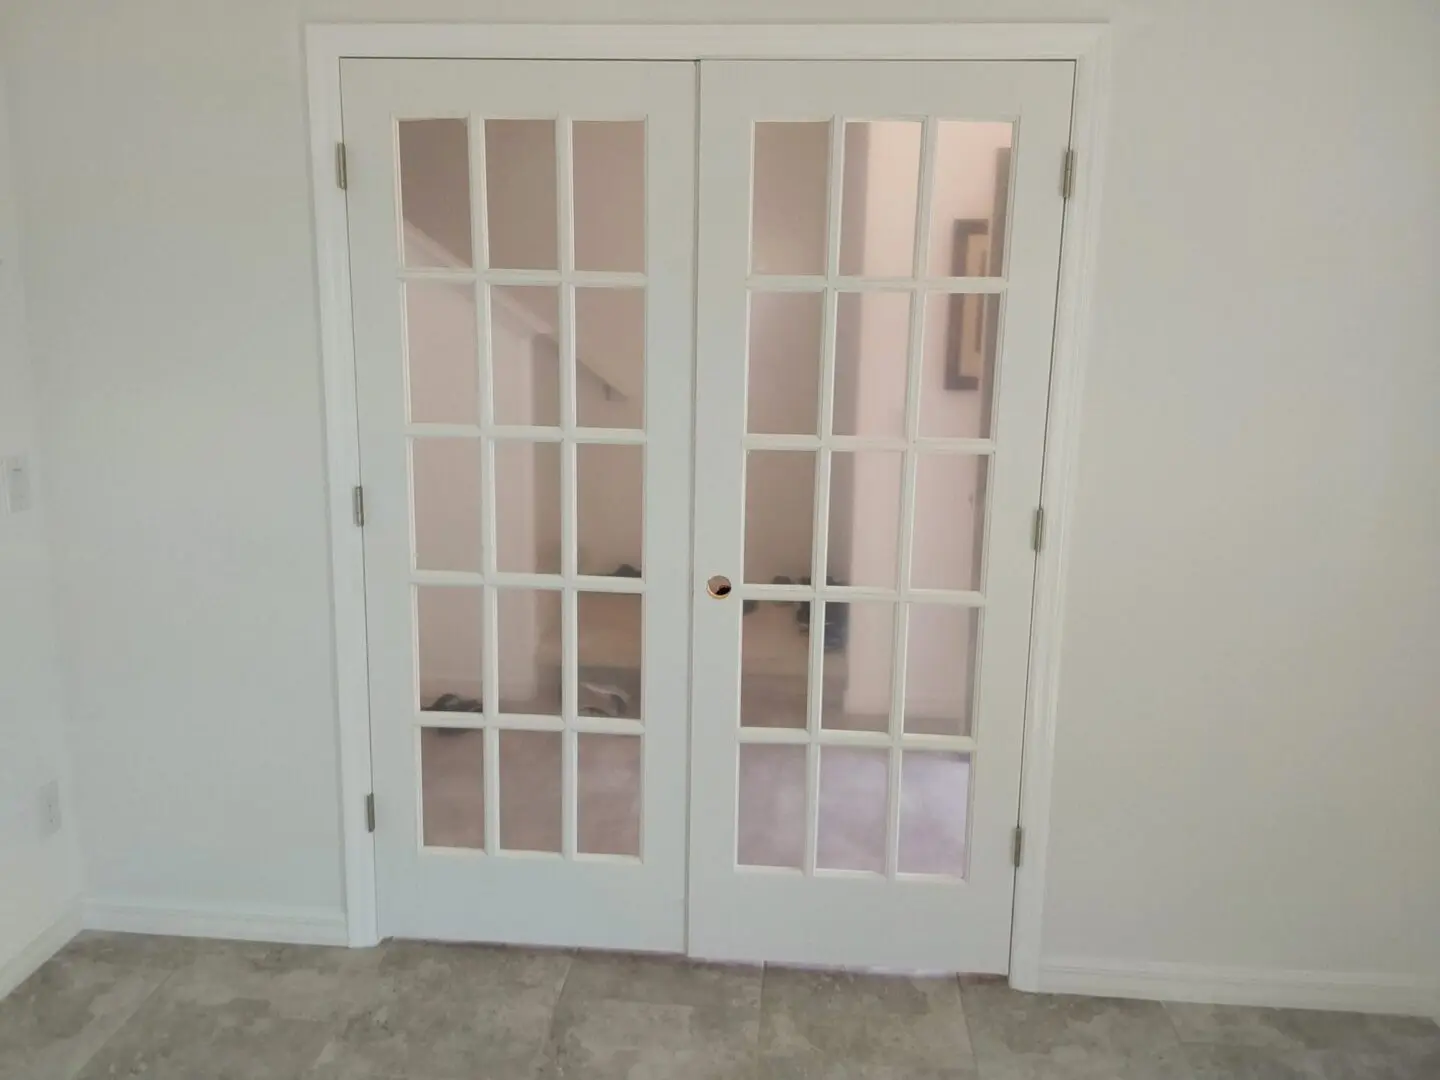 A pair of white doors with glass panes.